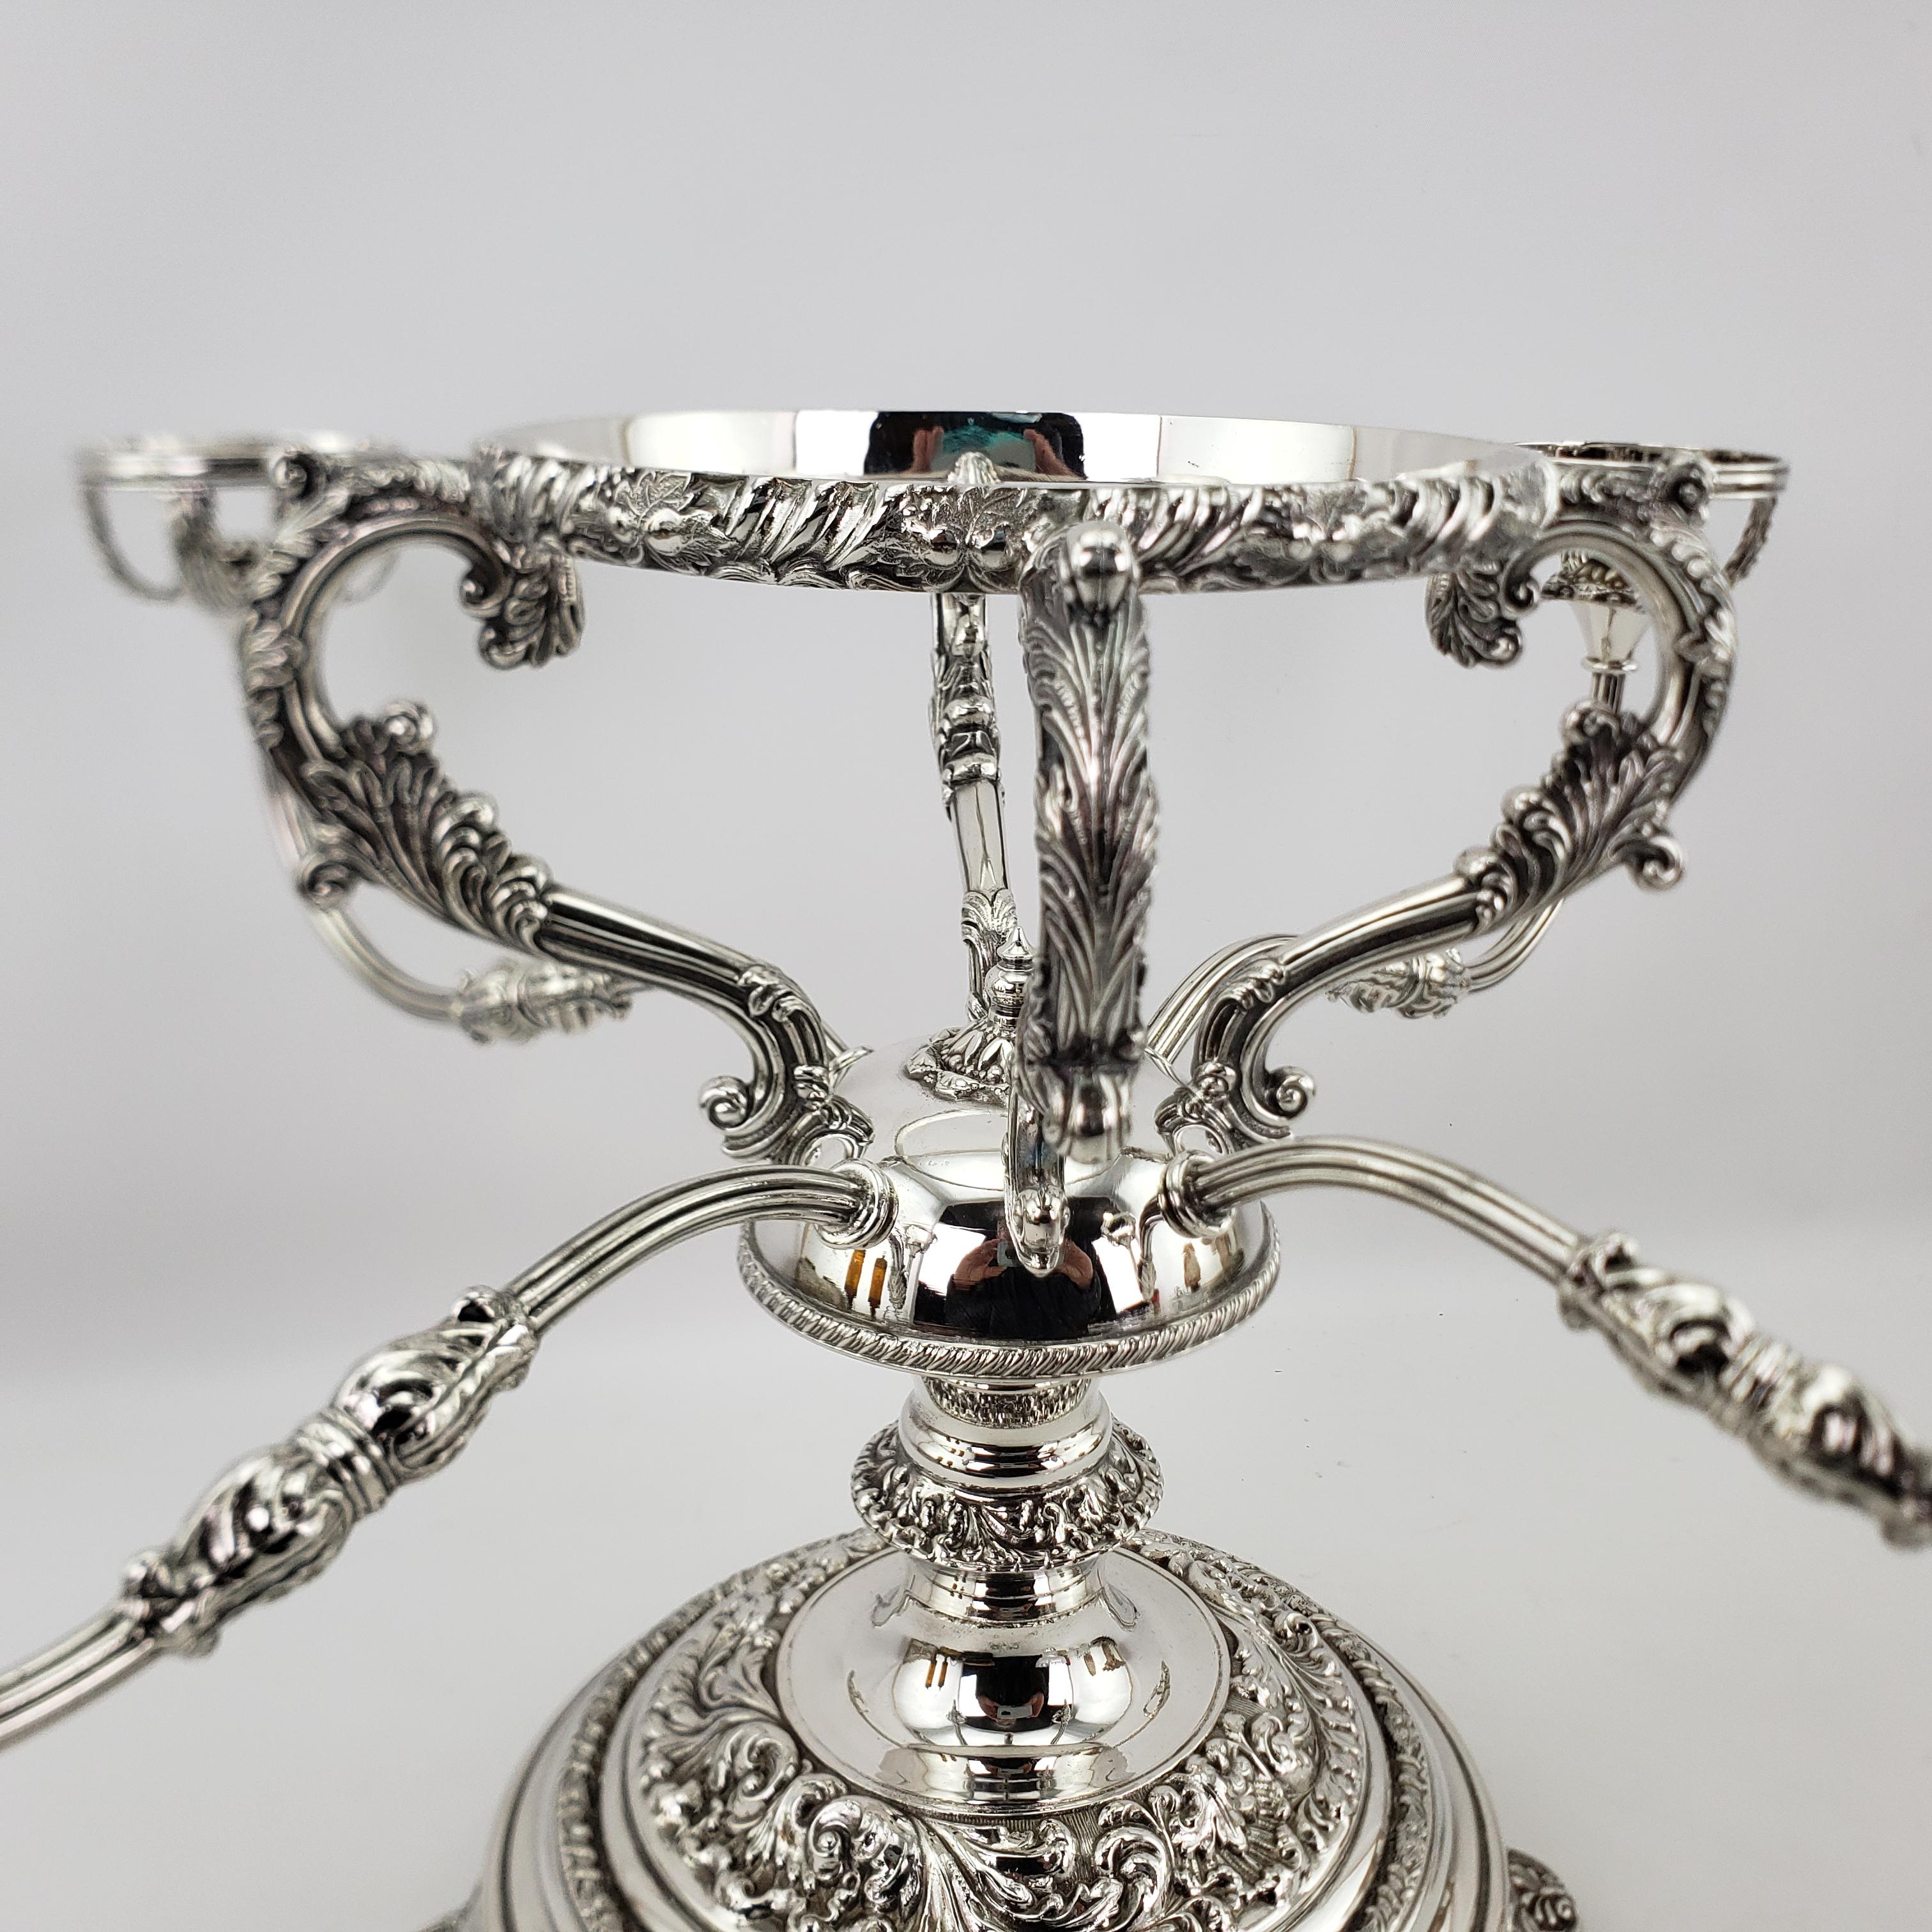 Large Antique Convertible Four Arm Silver Plate & Cut Crystal Bowls Centerpiece In Good Condition For Sale In Hamilton, Ontario